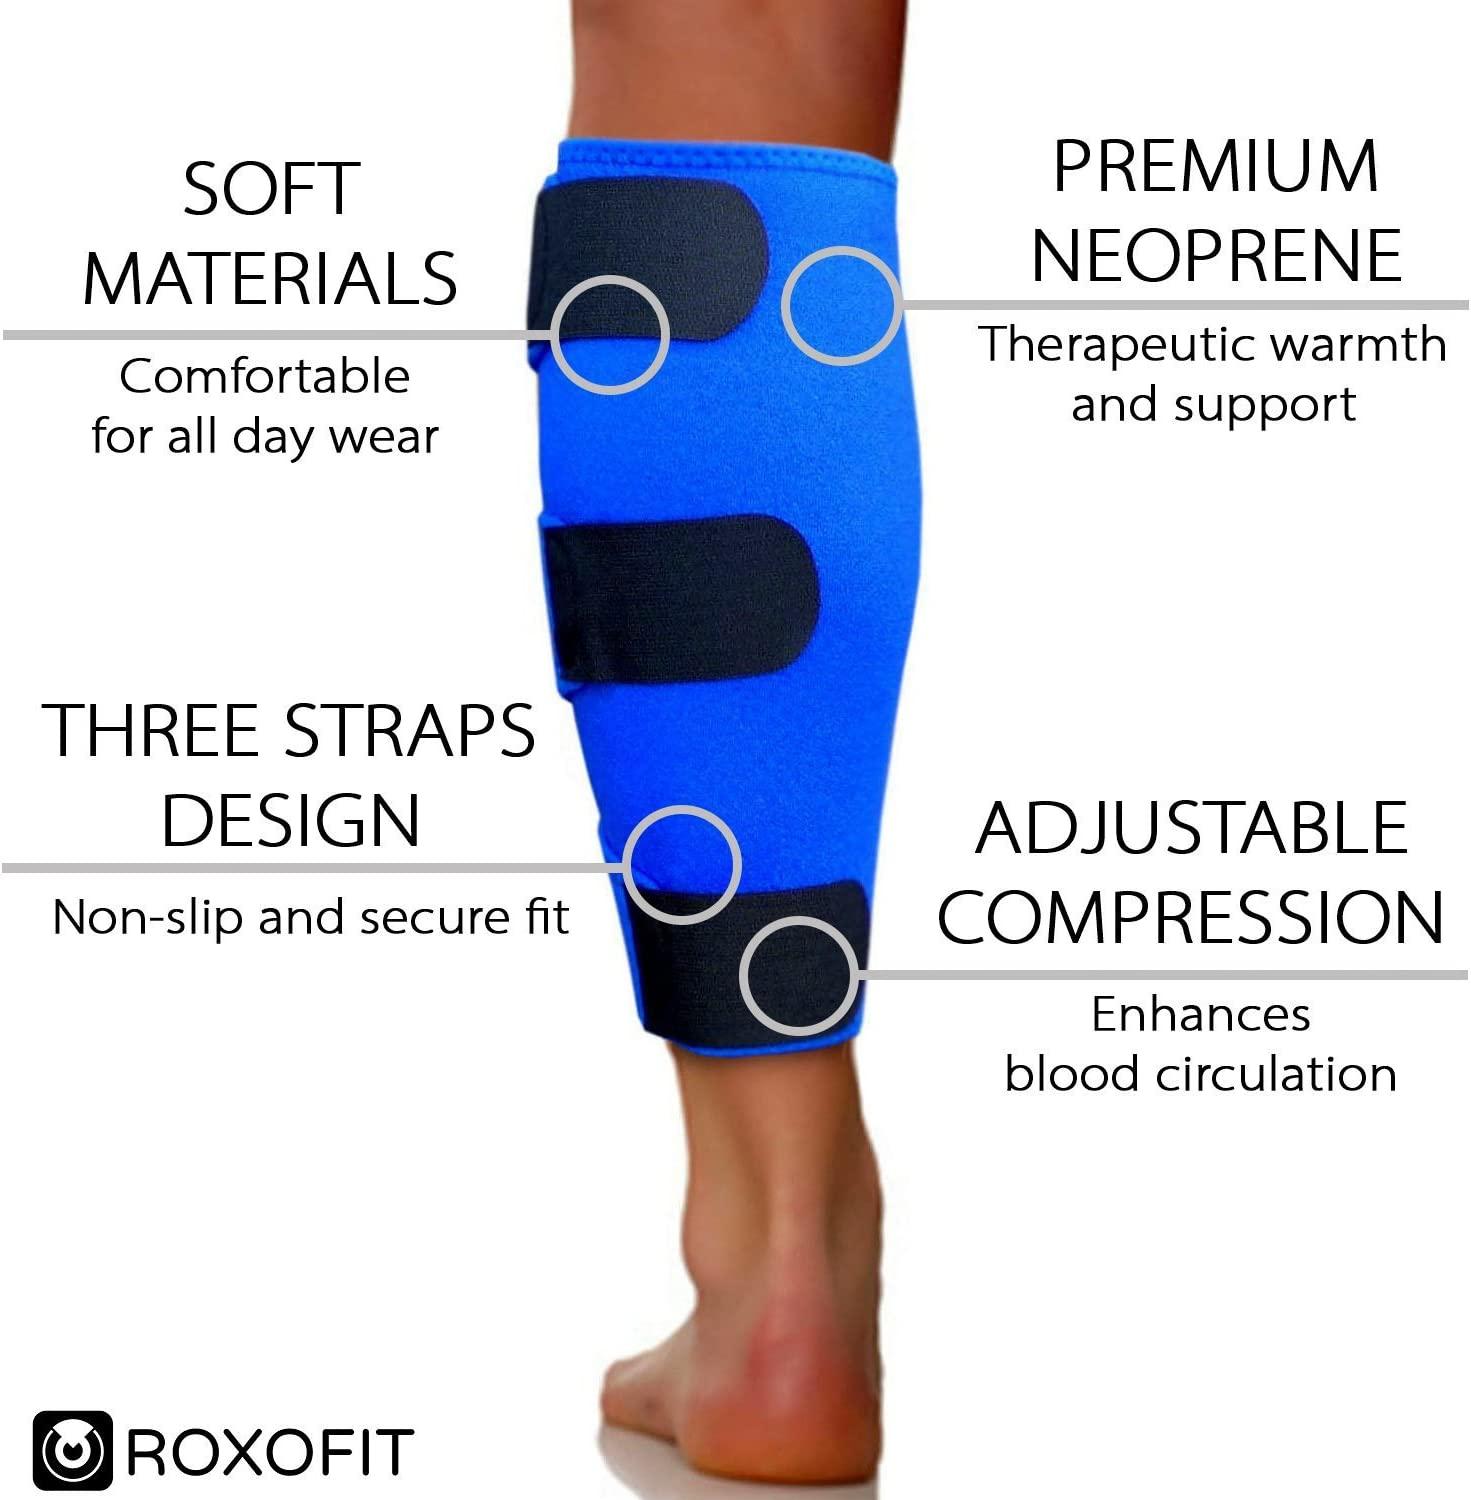 Shin Splint Calf Compression Sleeves Reduce Swelling and Pain